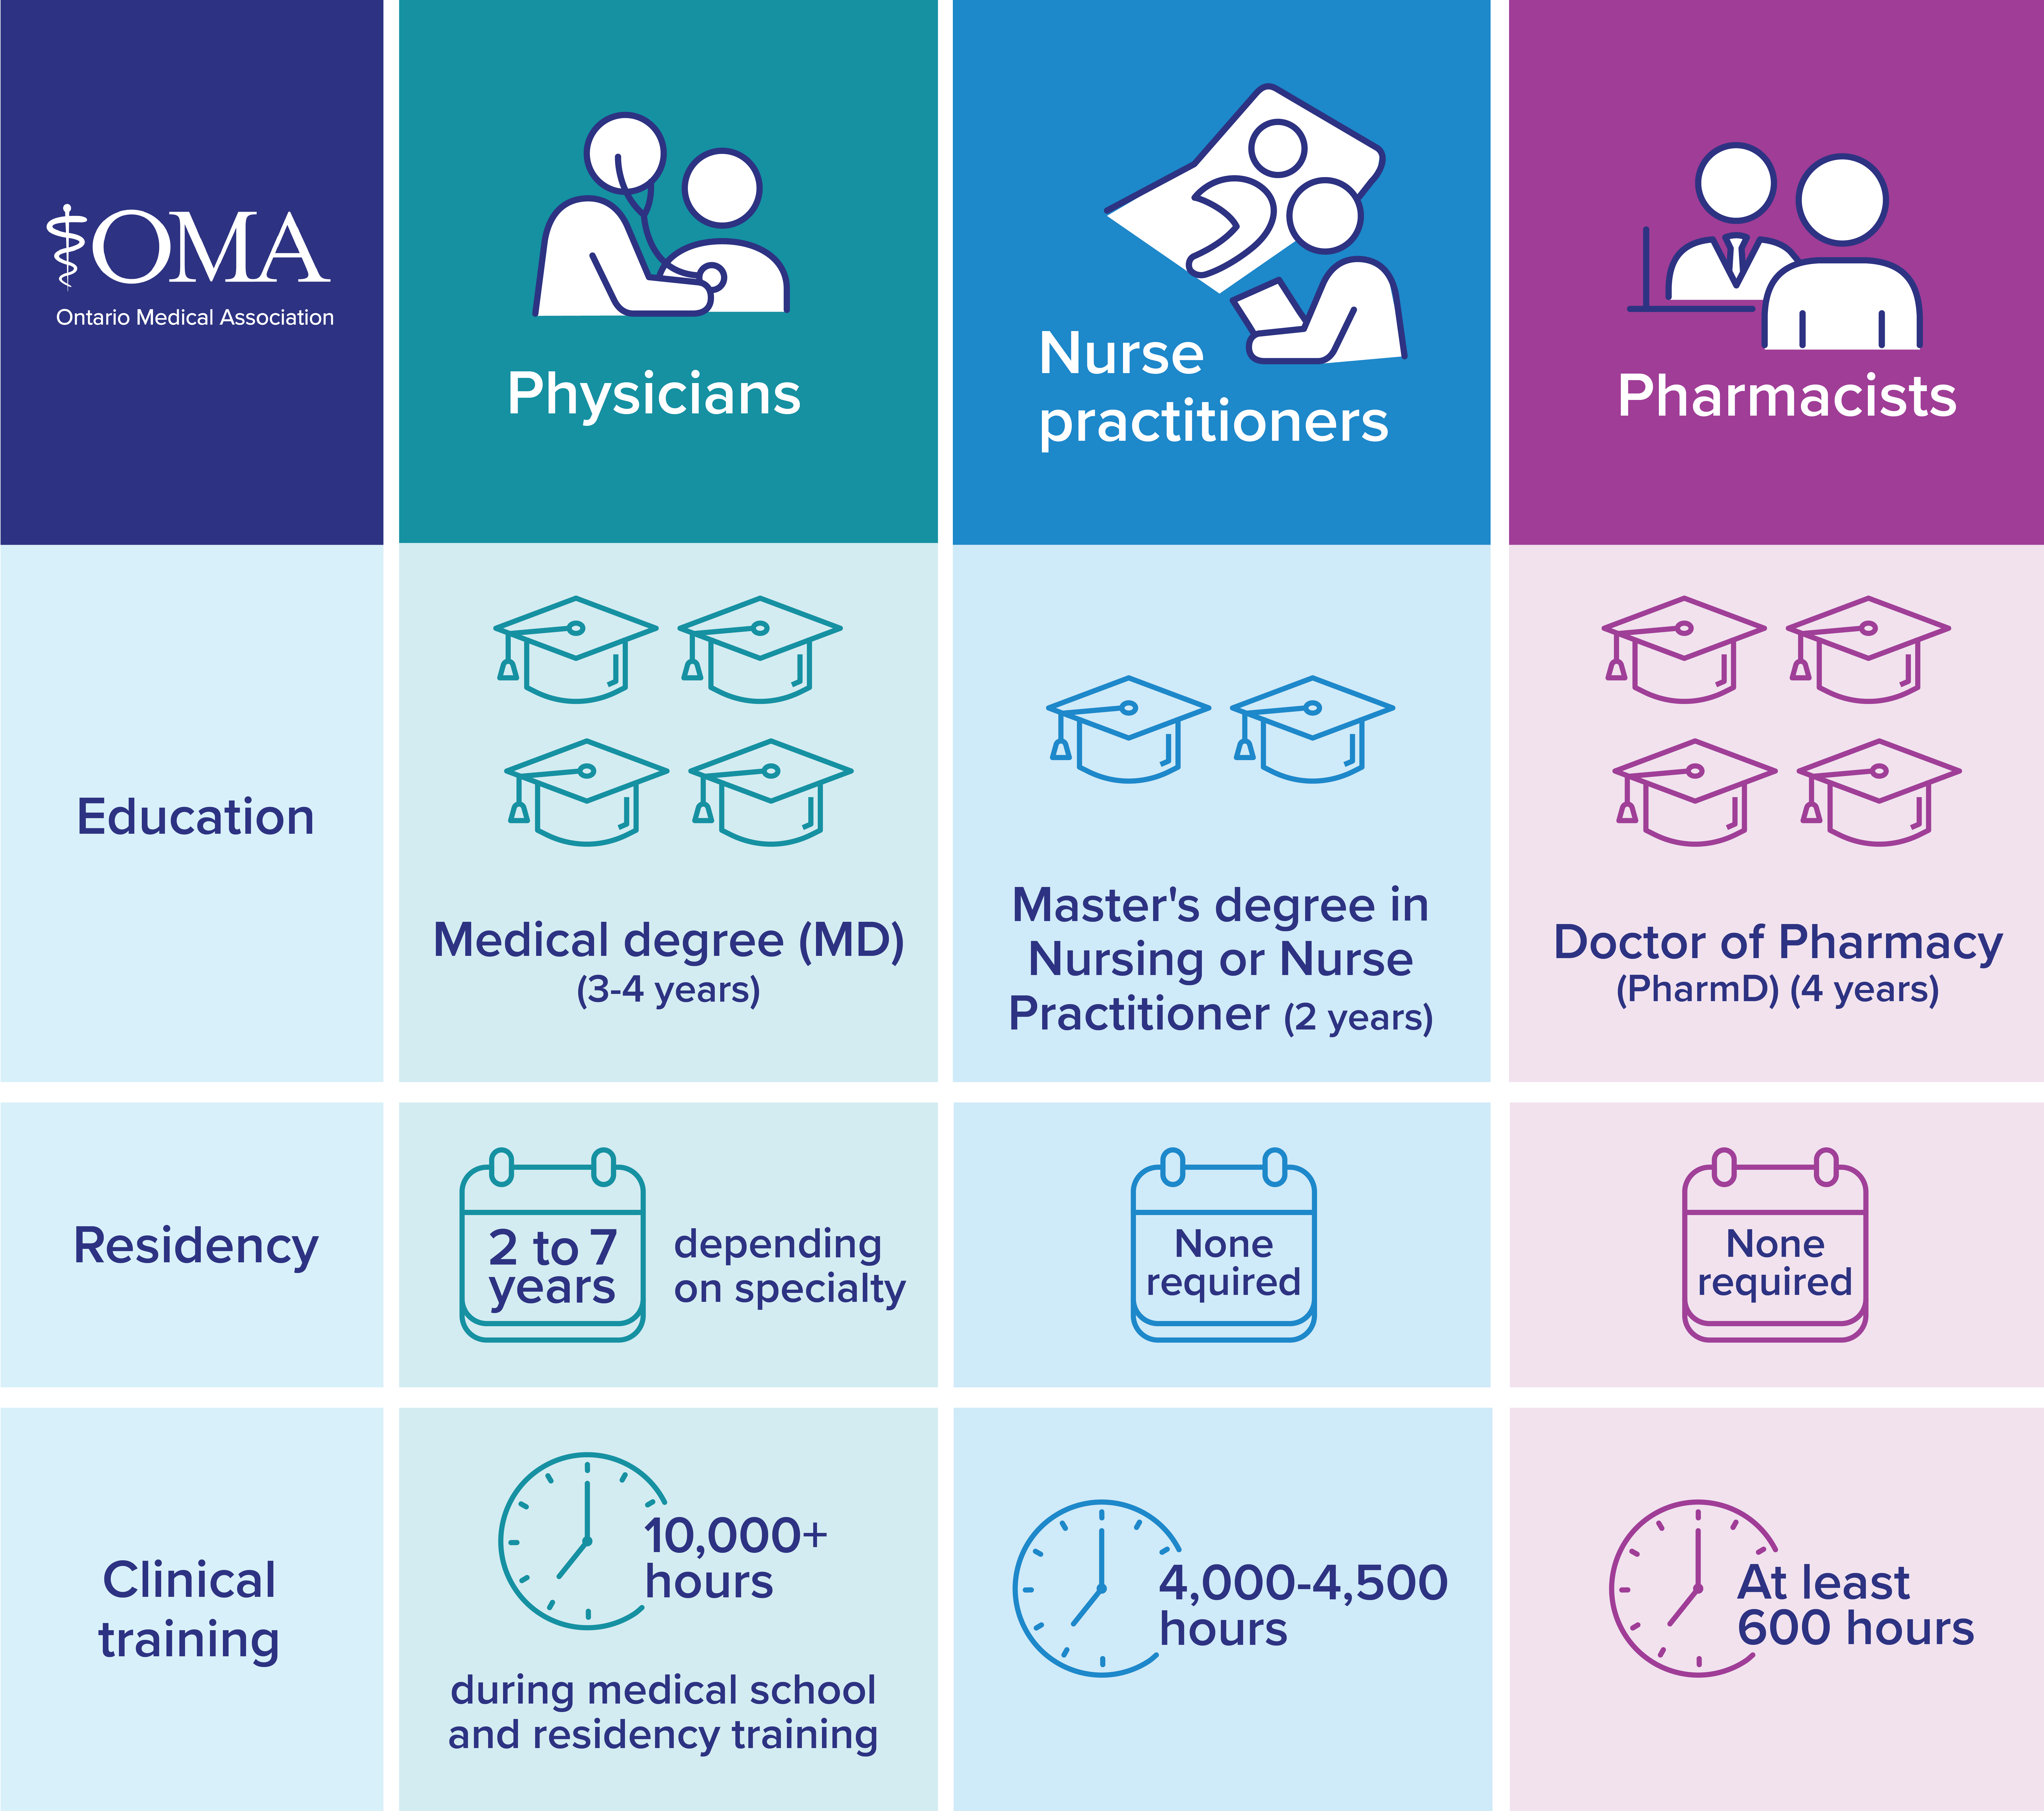 A graphic shows the differences in education, residency and training for physicians, nurse practitioners and pharmacists.